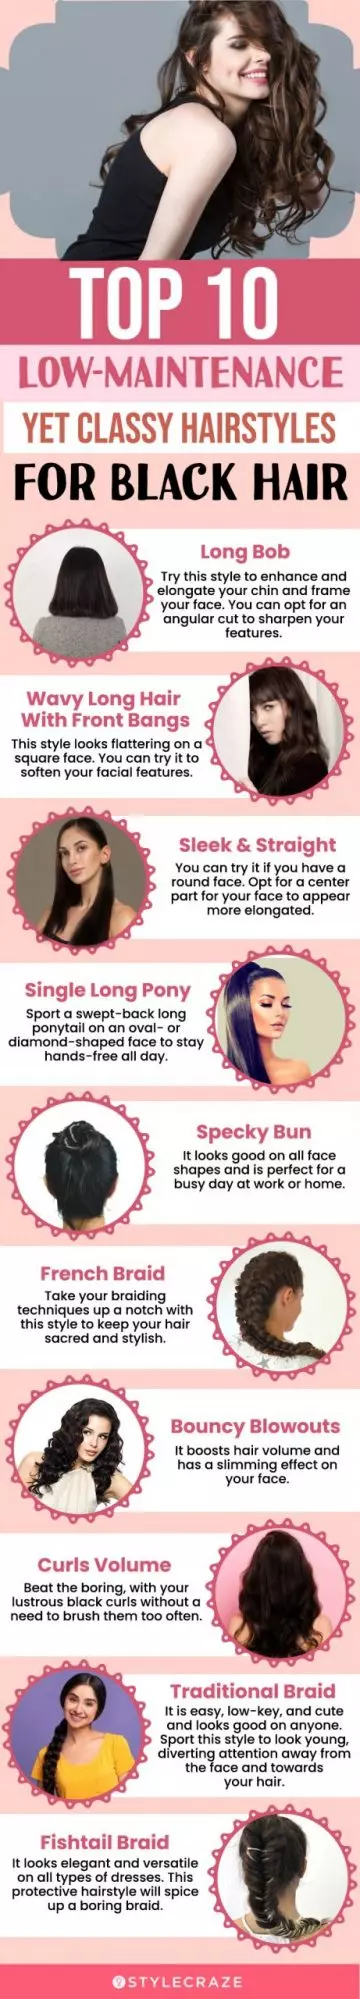 top 10 low maintenance yet classy hairstyles for black hair (infographic)